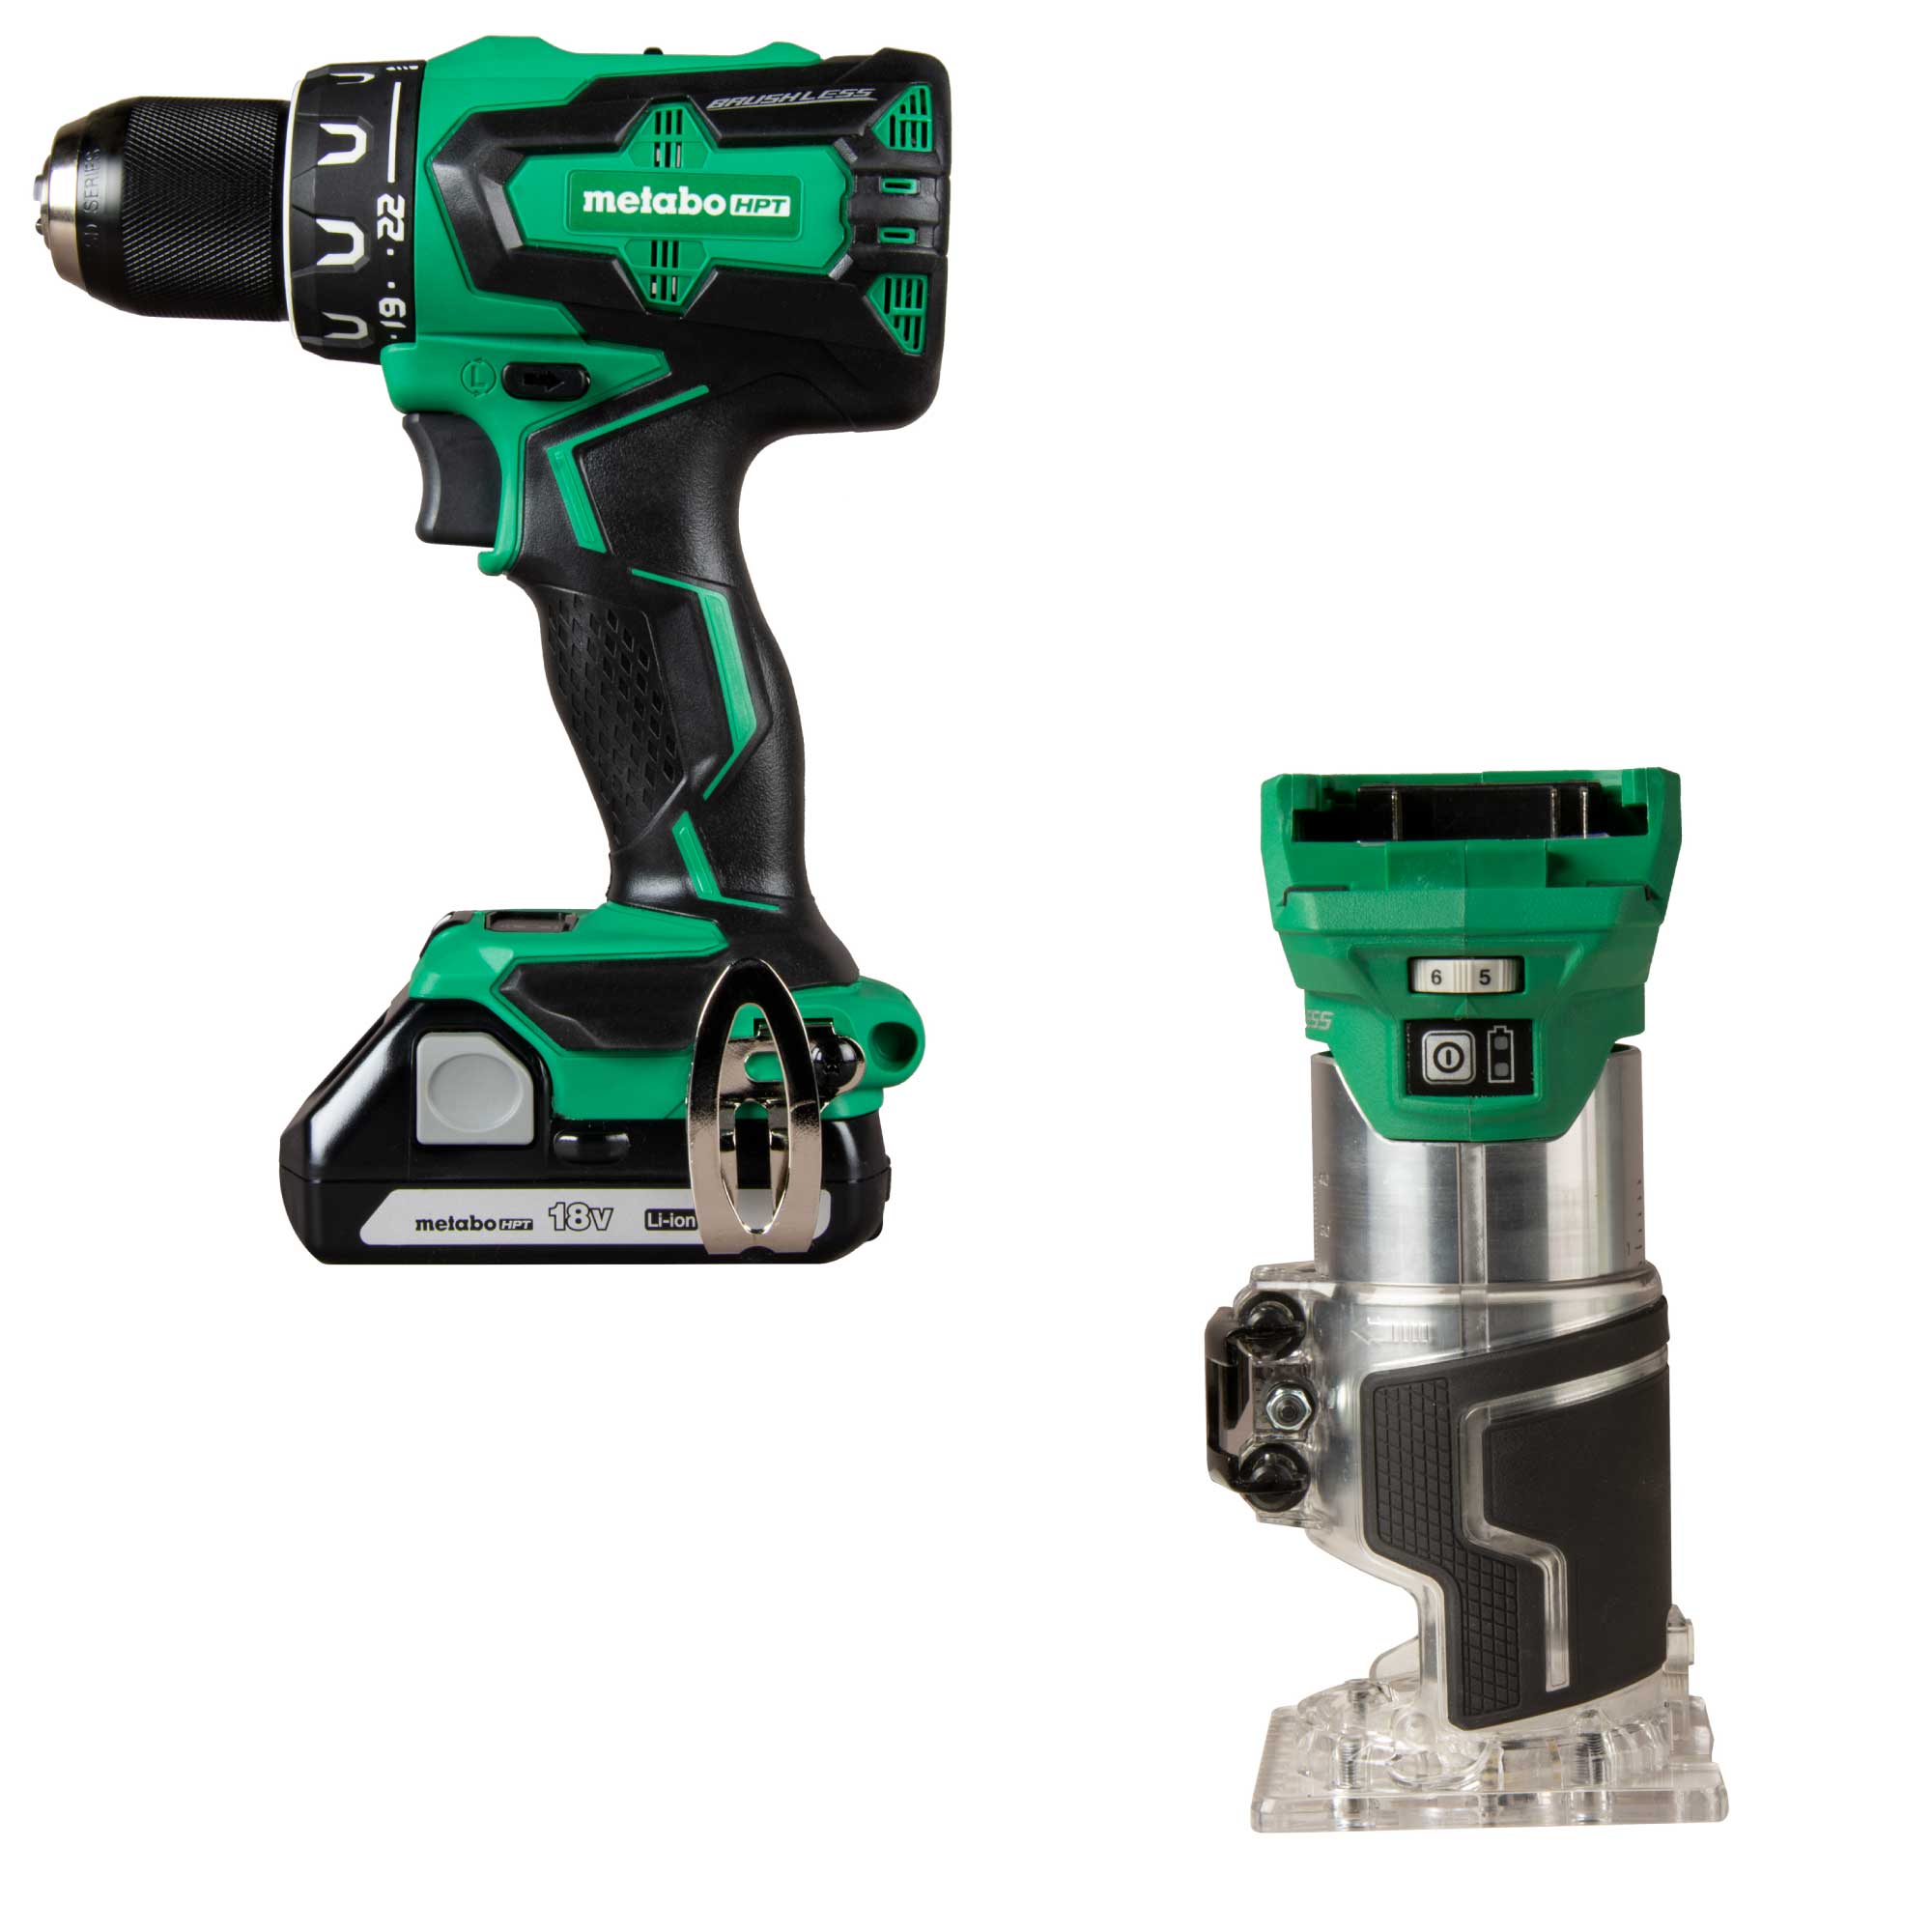 Metabo HPT MultiVolt 18-Volt 1/2-in Brushless Cordless Drill (2-batteries included and charger included) with MultiVolt 18-Volt 1/4-in Variable Speed